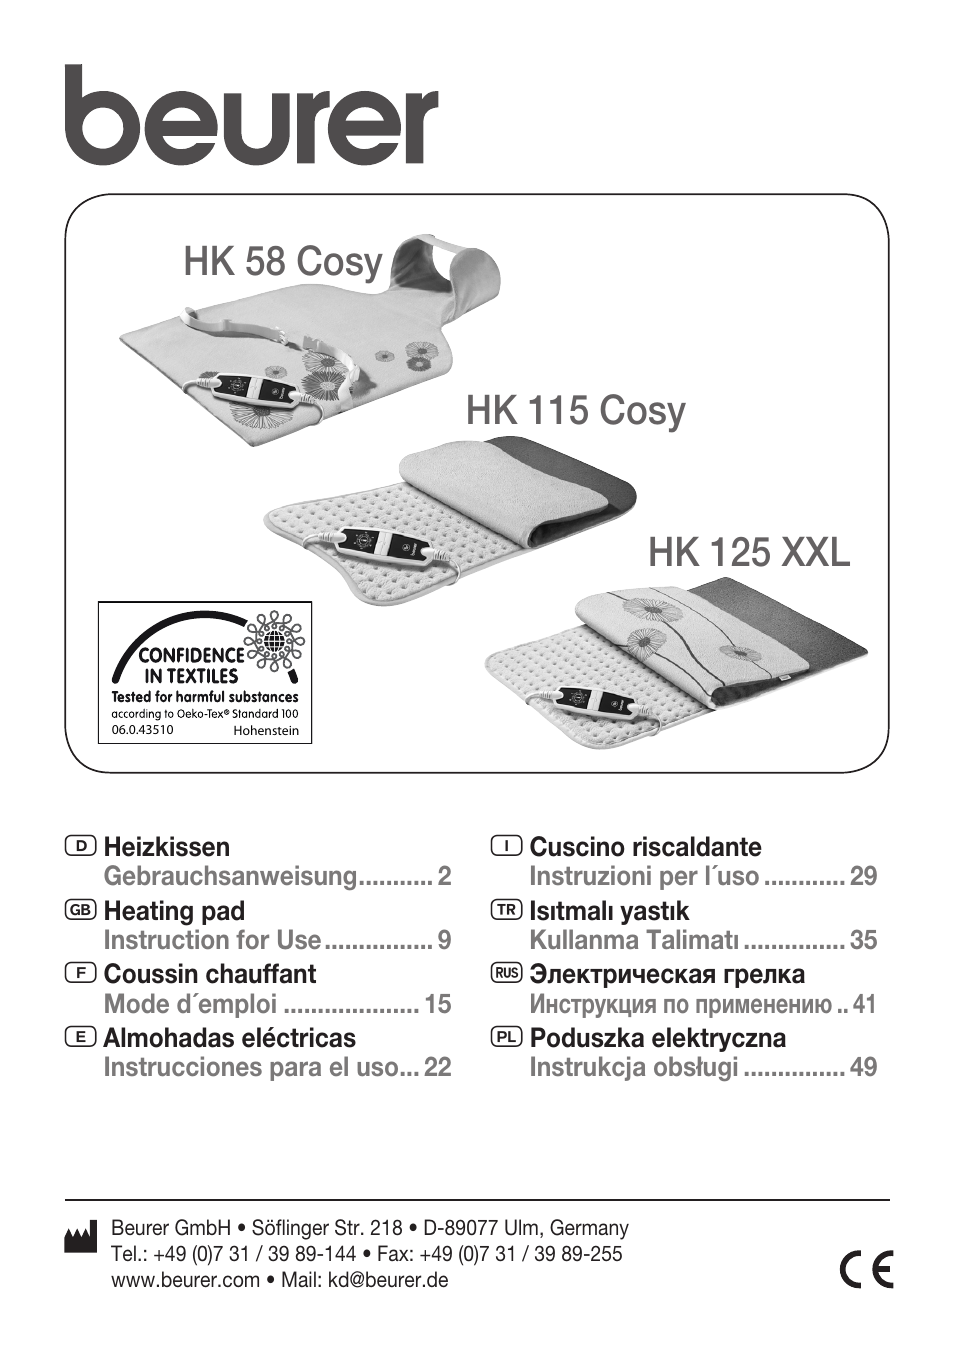 Beurer HK 58 Cosy User Manual | 56 pages | Also for: HK 115 Cosy, HK 125 XXL